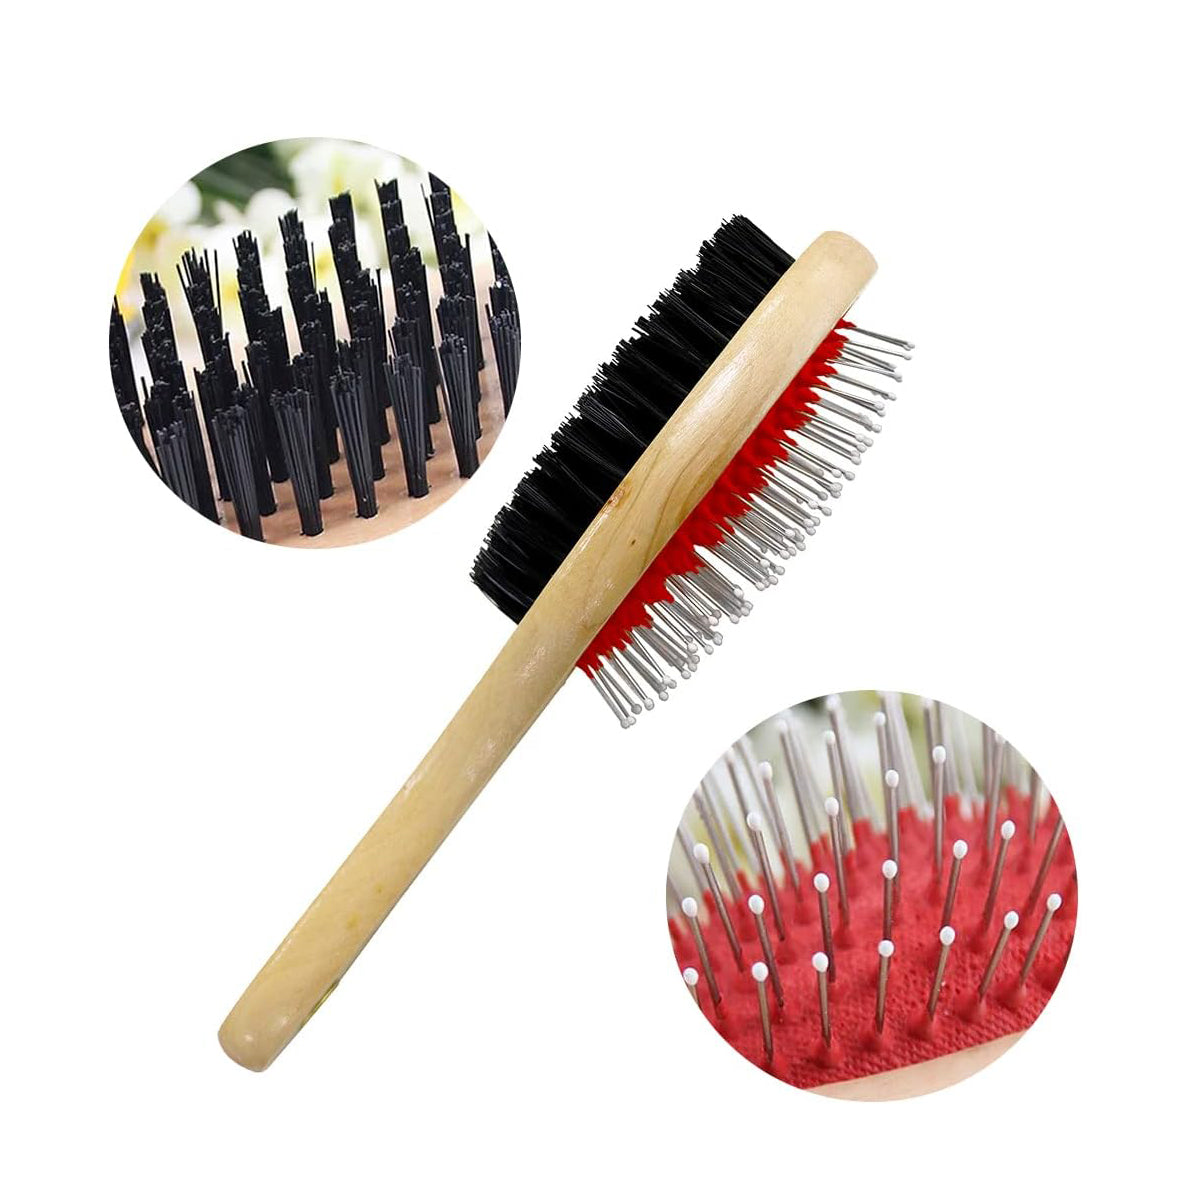 Rosewood Double Sided Wooden Pet Grooming Brush - 3 Sizes Available